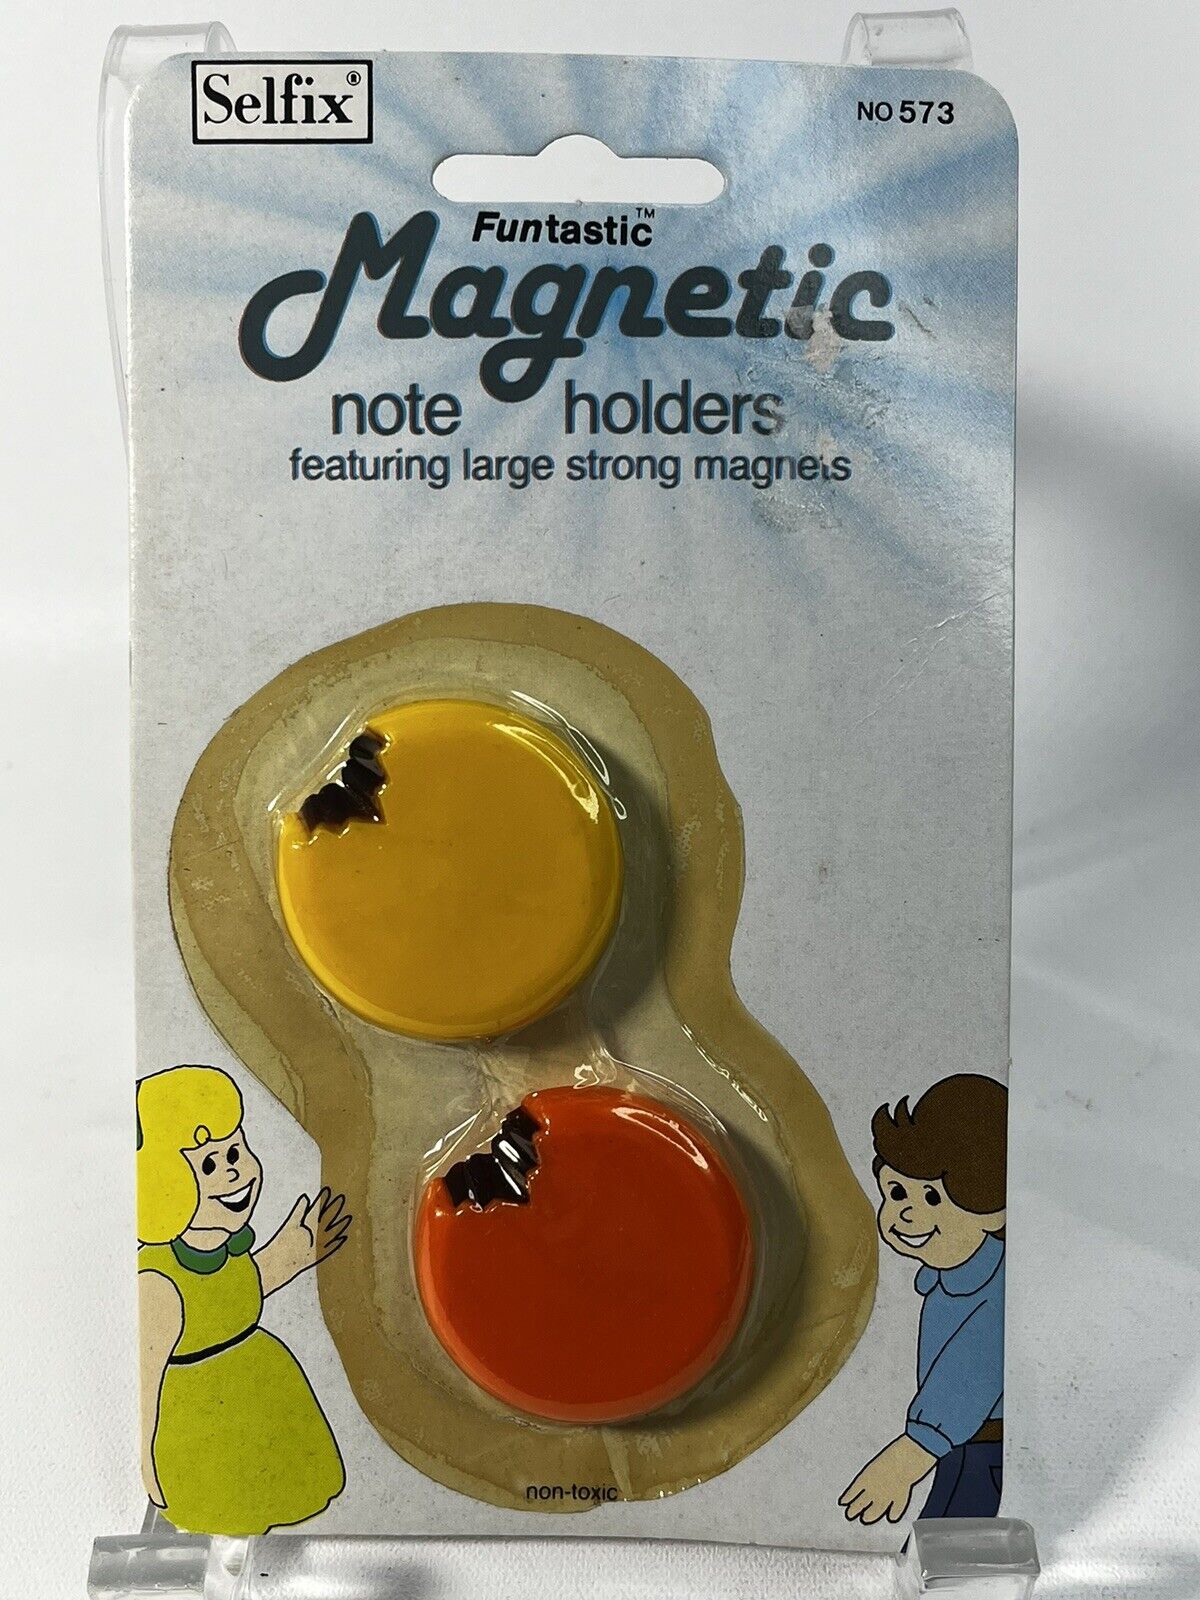 Vintage NOS Selfix Funtastic Magnetic Note Holders Cookie-shaped Magnets